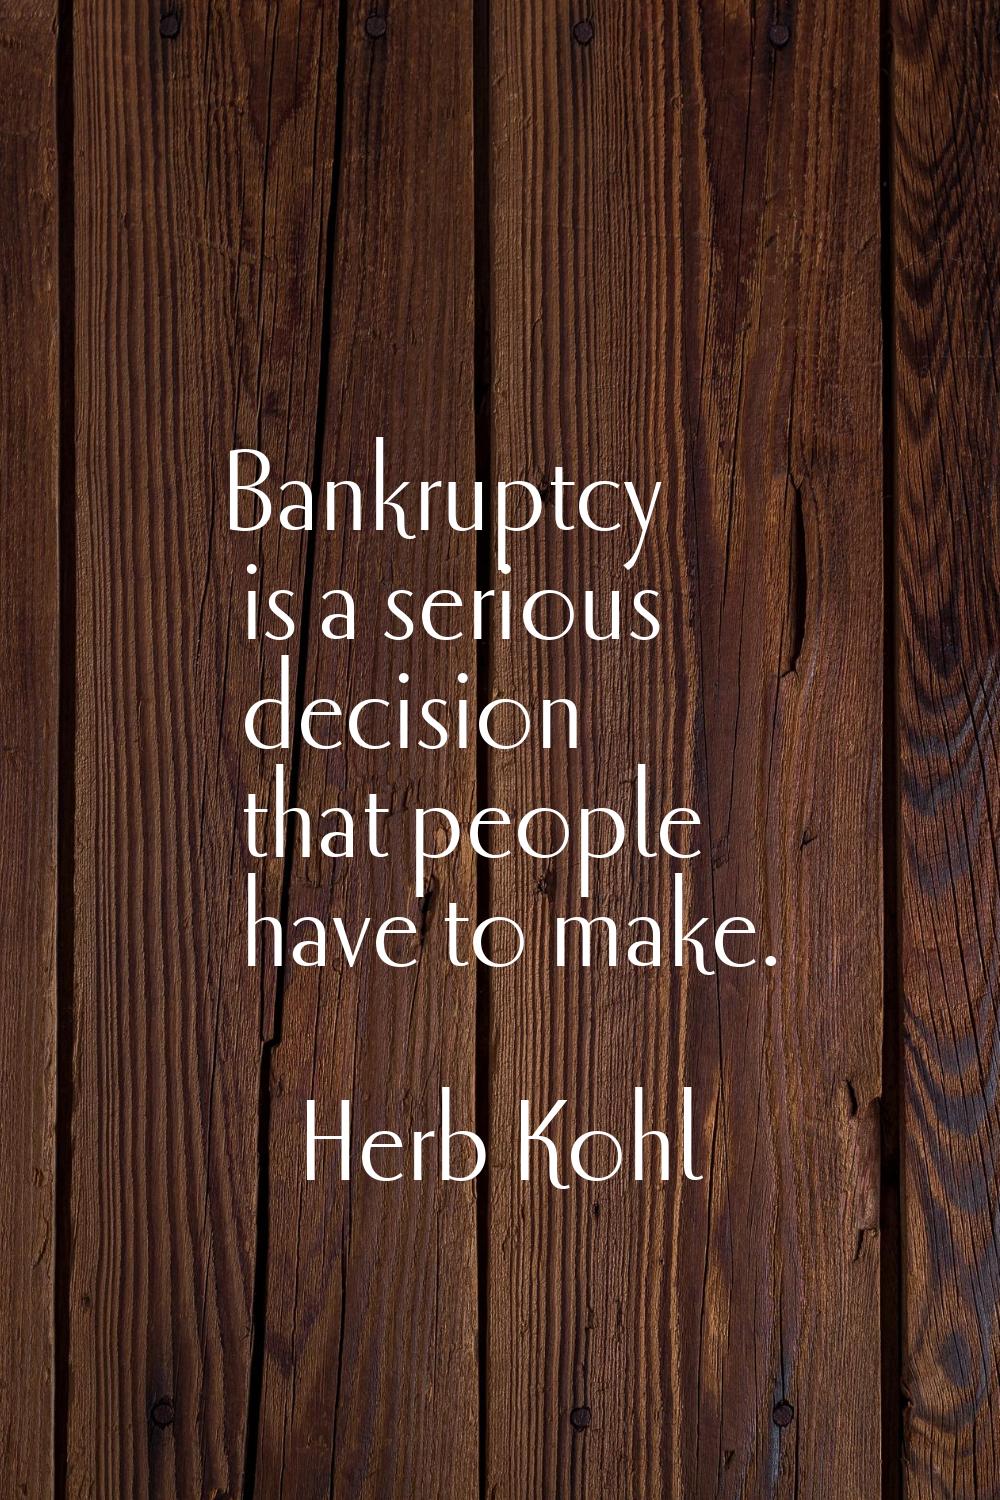 Bankruptcy is a serious decision that people have to make.